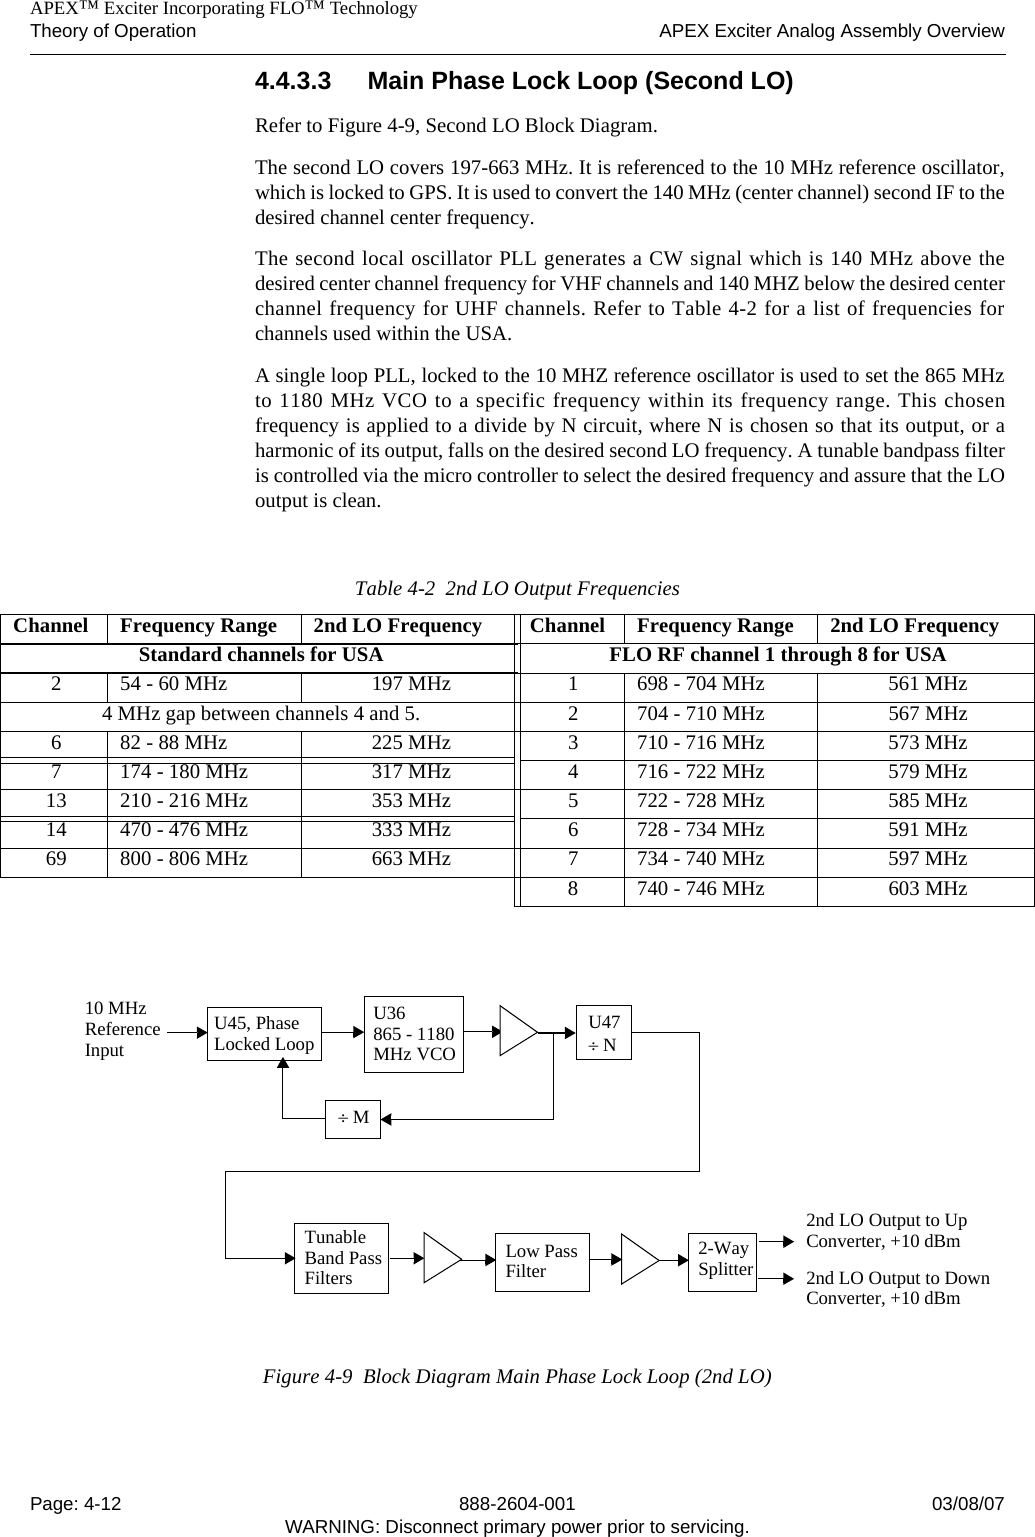    APEX™ Exciter Incorporating FLO™ TechnologyTheory of Operation APEX Exciter Analog Assembly OverviewPage: 4-12 888-2604-001 03/08/07WARNING: Disconnect primary power prior to servicing.4.4.3.3 Main Phase Lock Loop (Second LO)Refer to Figure 4-9, Second LO Block Diagram.The second LO covers 197-663 MHz. It is referenced to the 10 MHz reference oscillator,which is locked to GPS. It is used to convert the 140 MHz (center channel) second IF to thedesired channel center frequency. The second local oscillator PLL generates a CW signal which is 140 MHz above thedesired center channel frequency for VHF channels and 140 MHZ below the desired centerchannel frequency for UHF channels. Refer to Table 4-2 for a list of frequencies forchannels used within the USA. A single loop PLL, locked to the 10 MHZ reference oscillator is used to set the 865 MHzto 1180 MHz VCO to a specific frequency within its frequency range. This chosenfrequency is applied to a divide by N circuit, where N is chosen so that its output, or aharmonic of its output, falls on the desired second LO frequency. A tunable bandpass filteris controlled via the micro controller to select the desired frequency and assure that the LOoutput is clean.Figure 4-9  Block Diagram Main Phase Lock Loop (2nd LO)Table 4-2  2nd LO Output FrequenciesChannel Frequency Range 2nd LO Frequency Channel Frequency Range 2nd LO FrequencyStandard channels for USA FLO RF channel 1 through 8 for USA2 54 - 60 MHz 197 MHz 1 698 - 704 MHz 561 MHz4 MHz gap between channels 4 and 5. 2 704 - 710 MHz 567 MHz6 82 - 88 MHz 225 MHz 3 710 - 716 MHz 573 MHz7 174 - 180 MHz 317 MHz 4 716 - 722 MHz 579 MHz13 210 - 216 MHz 353 MHz 5 722 - 728 MHz 585 MHz14 470 - 476 MHz 333 MHz 6 728 - 734 MHz 591 MHz69 800 - 806 MHz 663 MHz 7 734 - 740 MHz 597 MHz8 740 - 746 MHz 603 MHz2nd LO Output to UpConverter, +10 dBm2nd LO Output to DownConverter, +10 dBm10 MHz Reference Input2-WaySplitterLow Pass FilterU36865 - 1180U45, Phase÷ MMHz VCOU47TunableBand Pass FiltersLocked Loop ÷ N